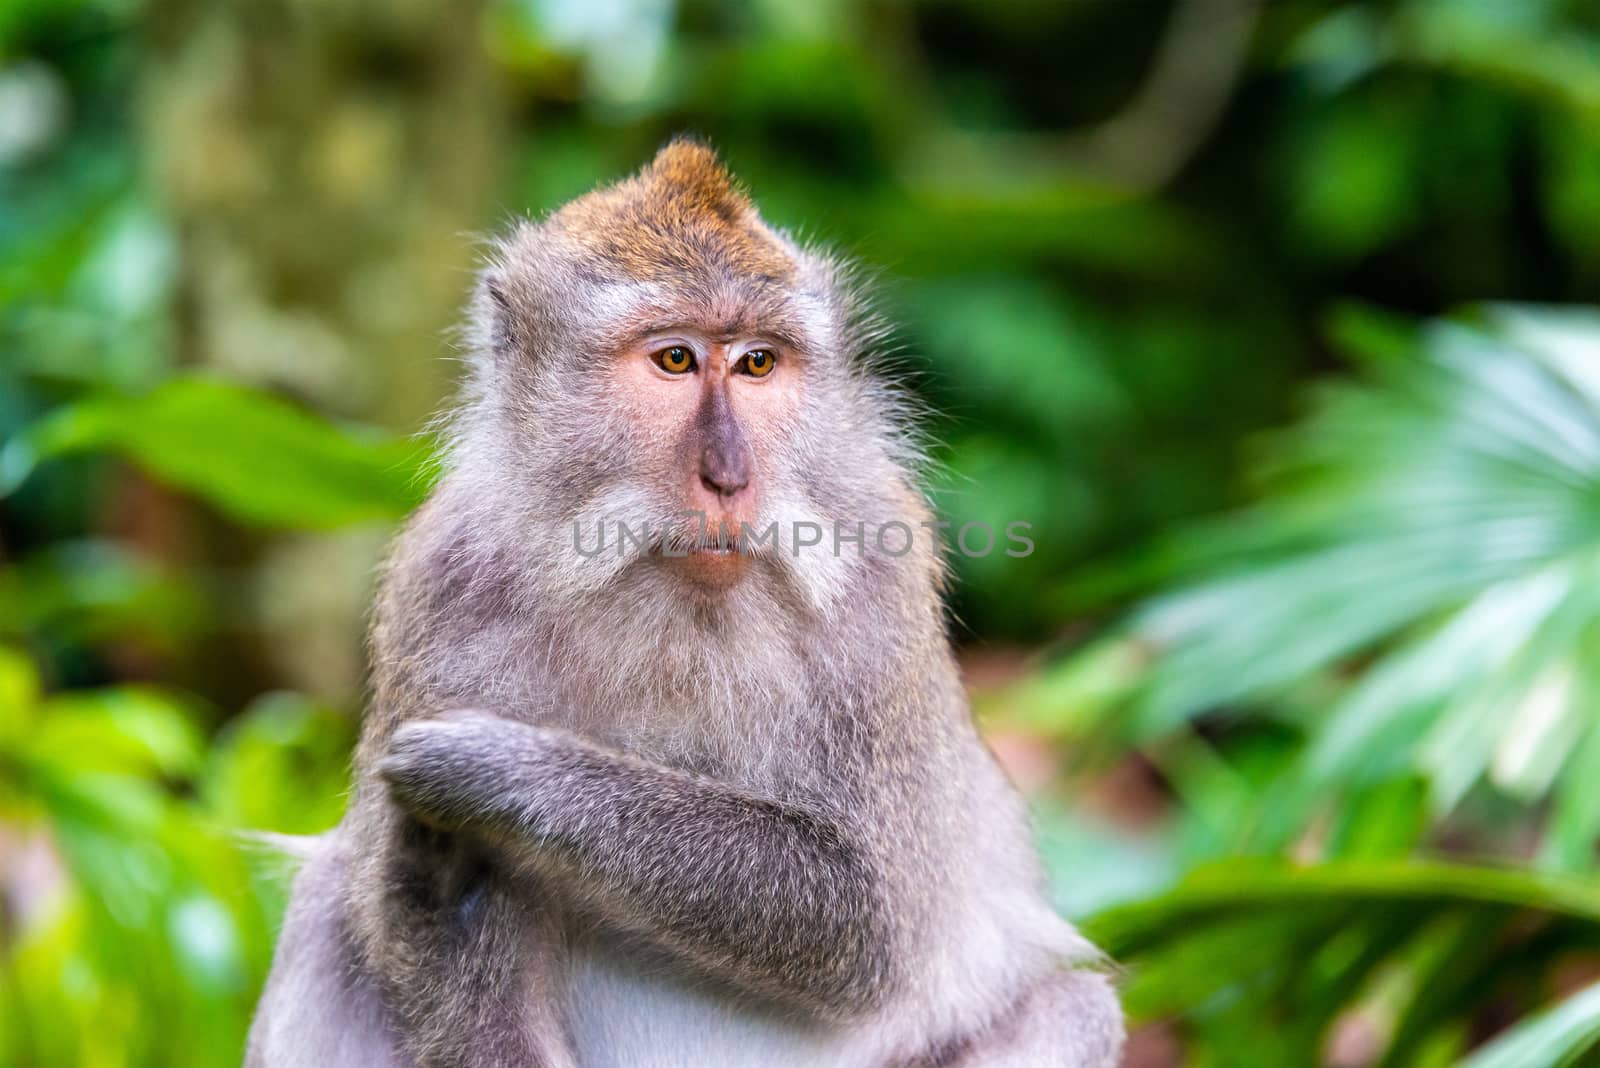 Macaque monkey at Ubud Monkey Forest in Bali, Indonesia